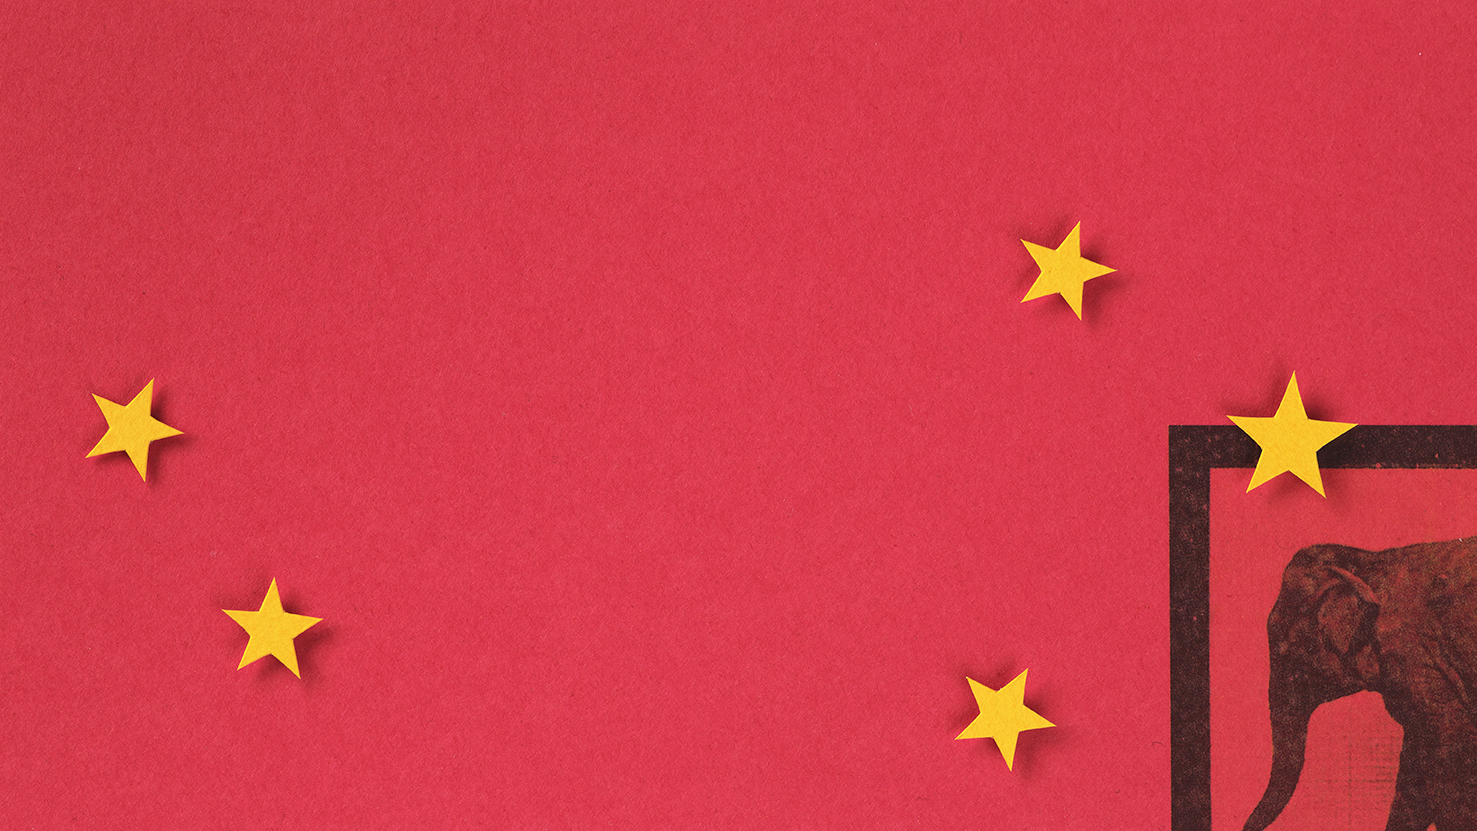 An elephant on a red background with five yellow stars over it, suggesting the Chinese flag